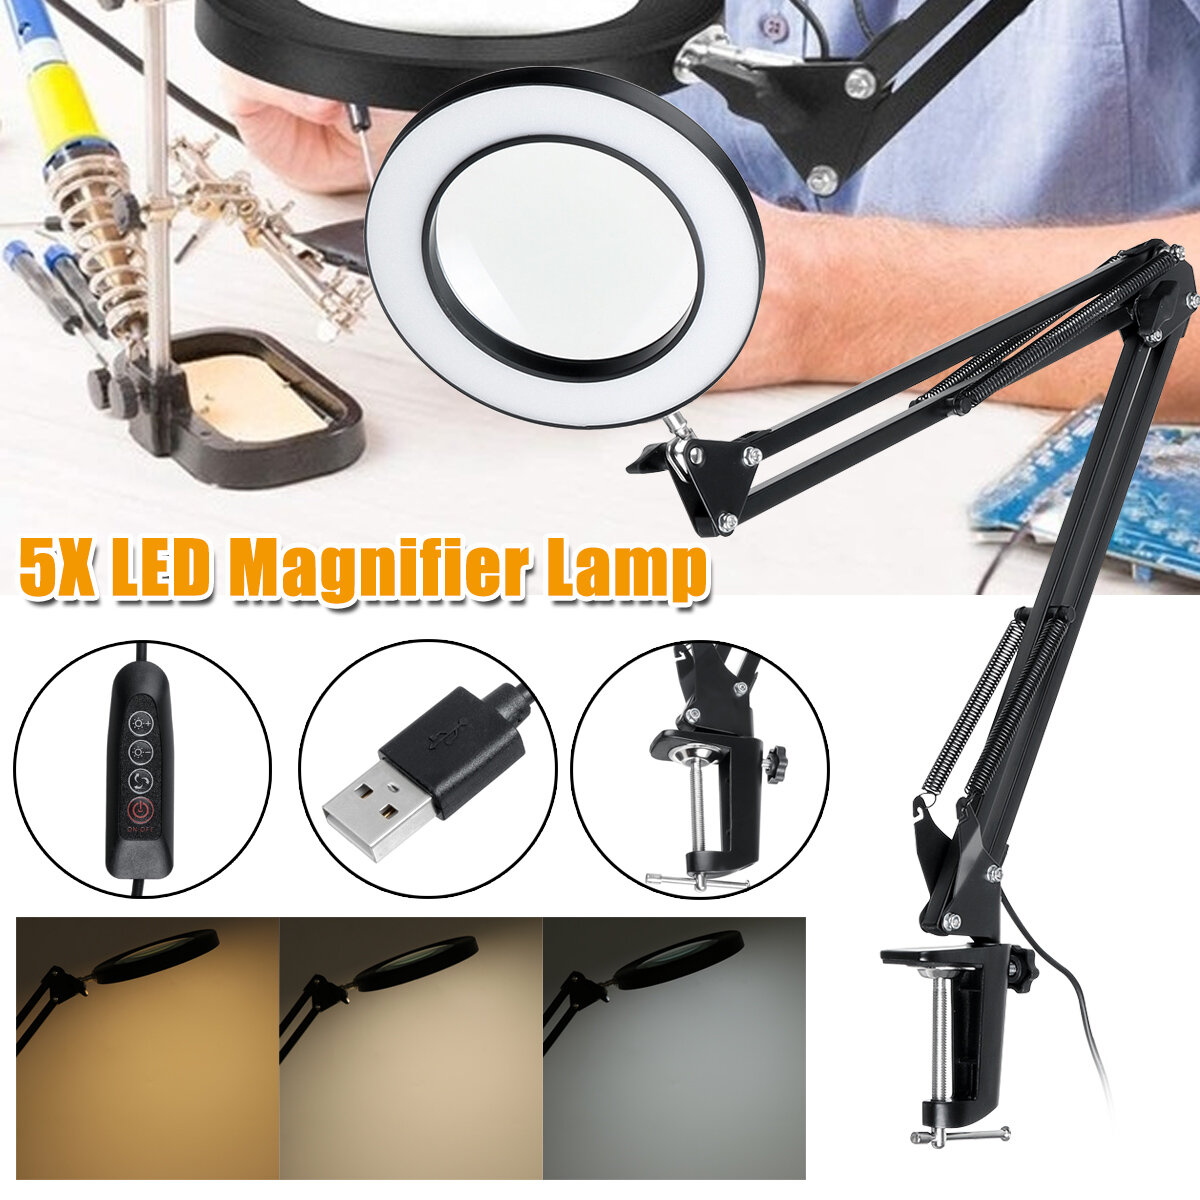 Image of 5X Magnifying Lamp Clamp Mount LED Magnifier Lamp Manicure Tattoo Beauty Light